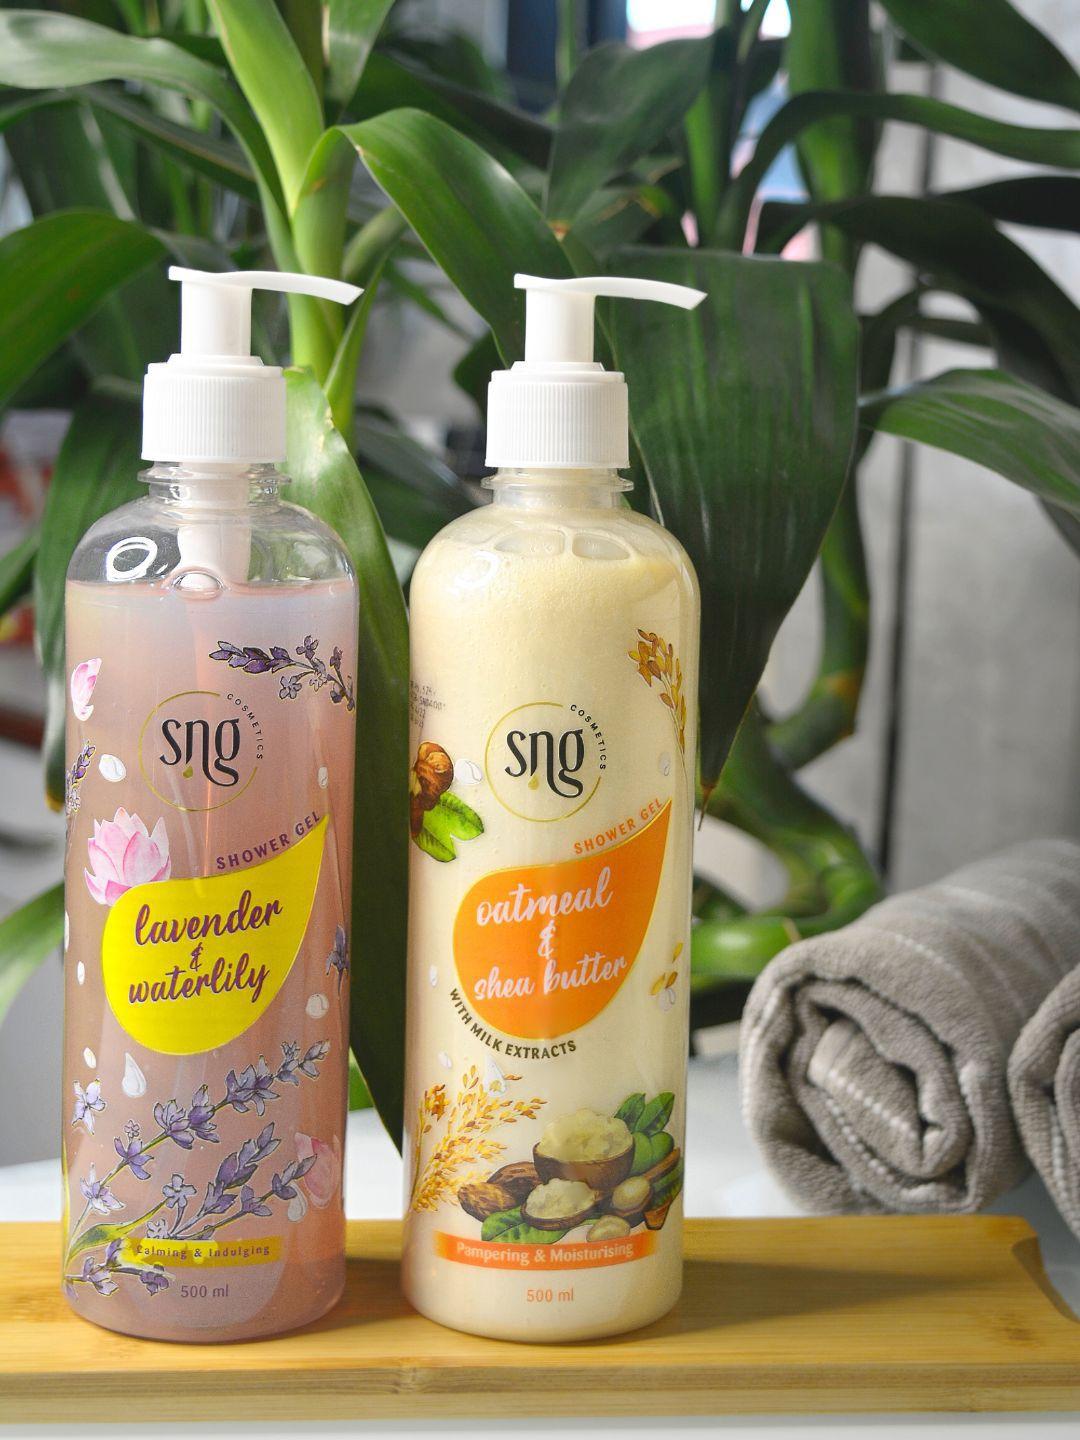 sng-cosmetics-set-of-2-lavender-&-waterlily-&-oatmeal-&-shea-butter-shower-gels-500ml-each